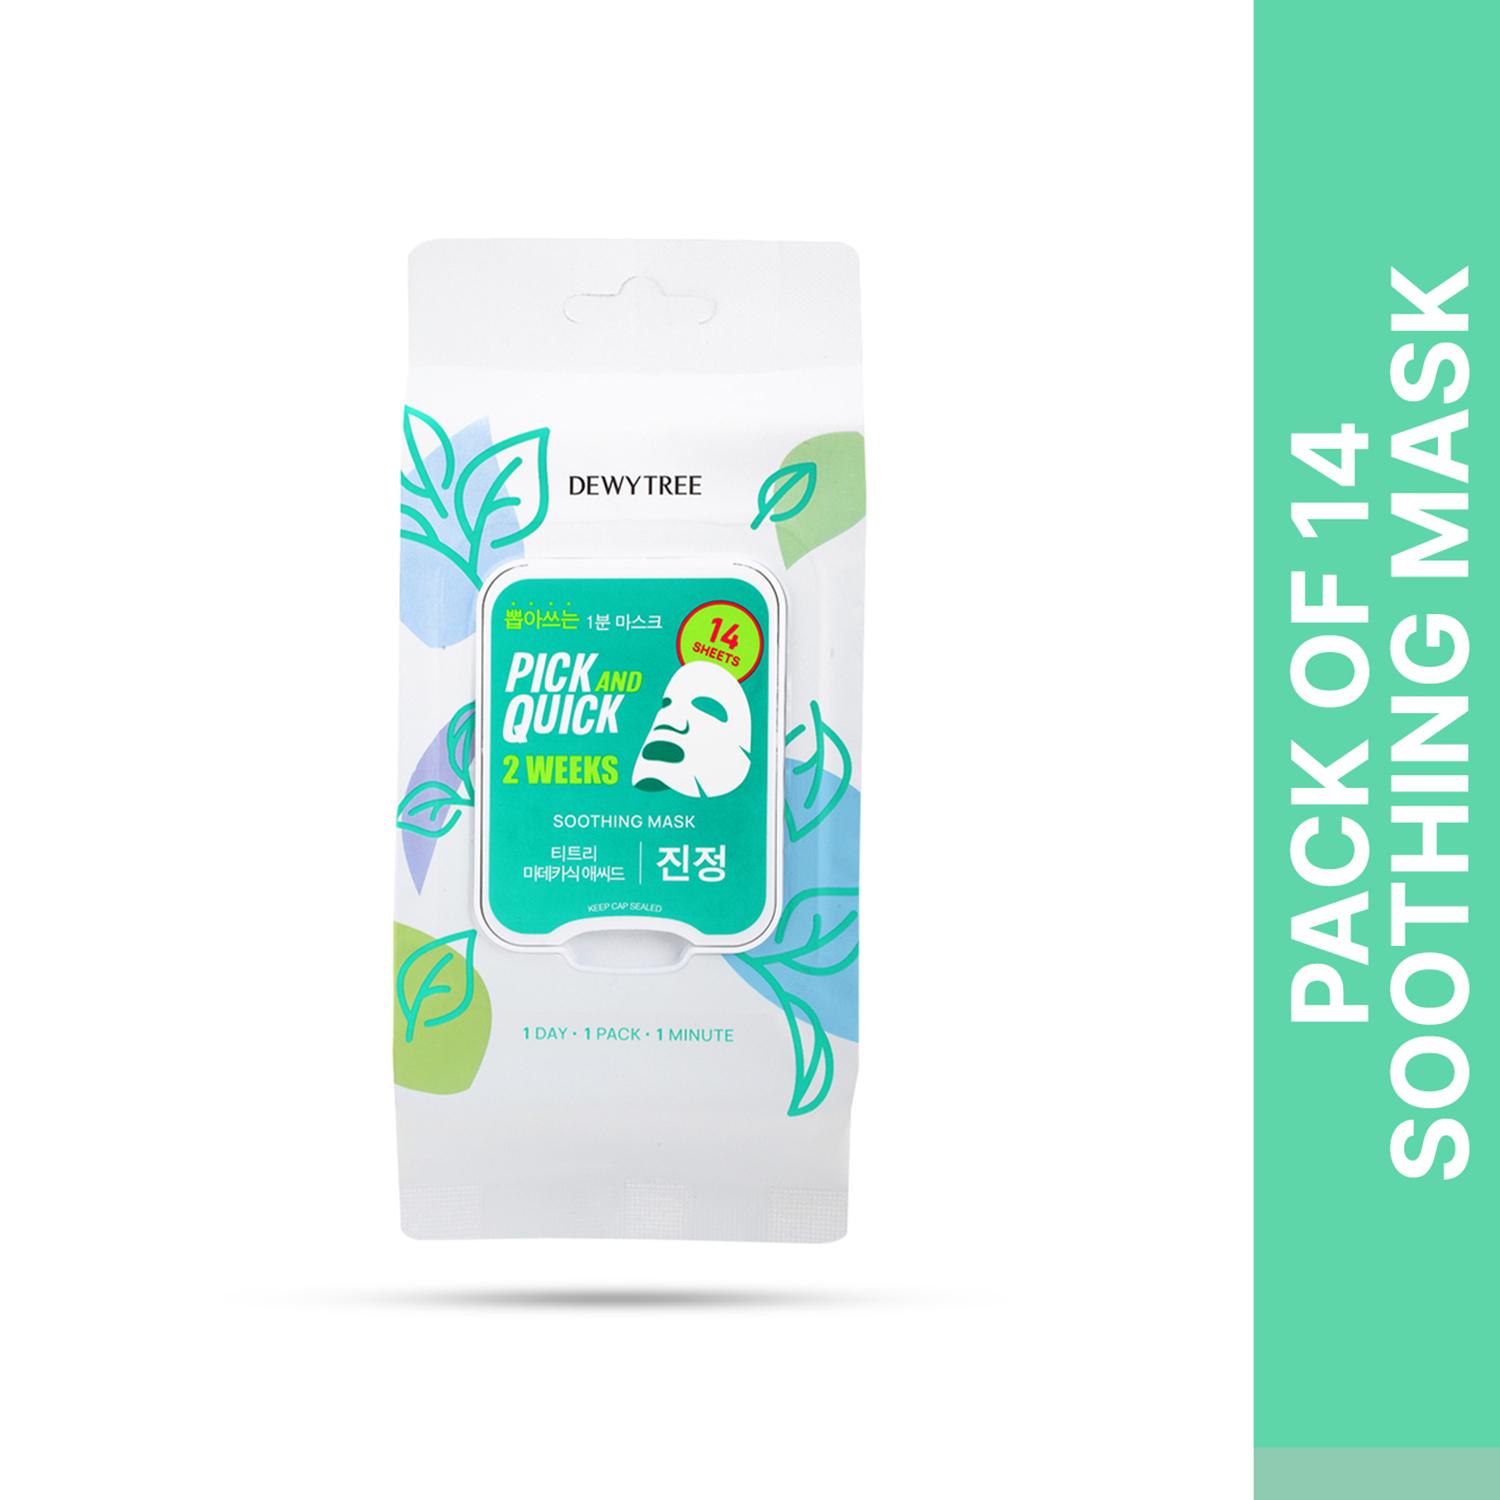 Dewytree | Dewytree Pick and Quick 2 Weeks Soothing Sheet Mask - (14Pcs)